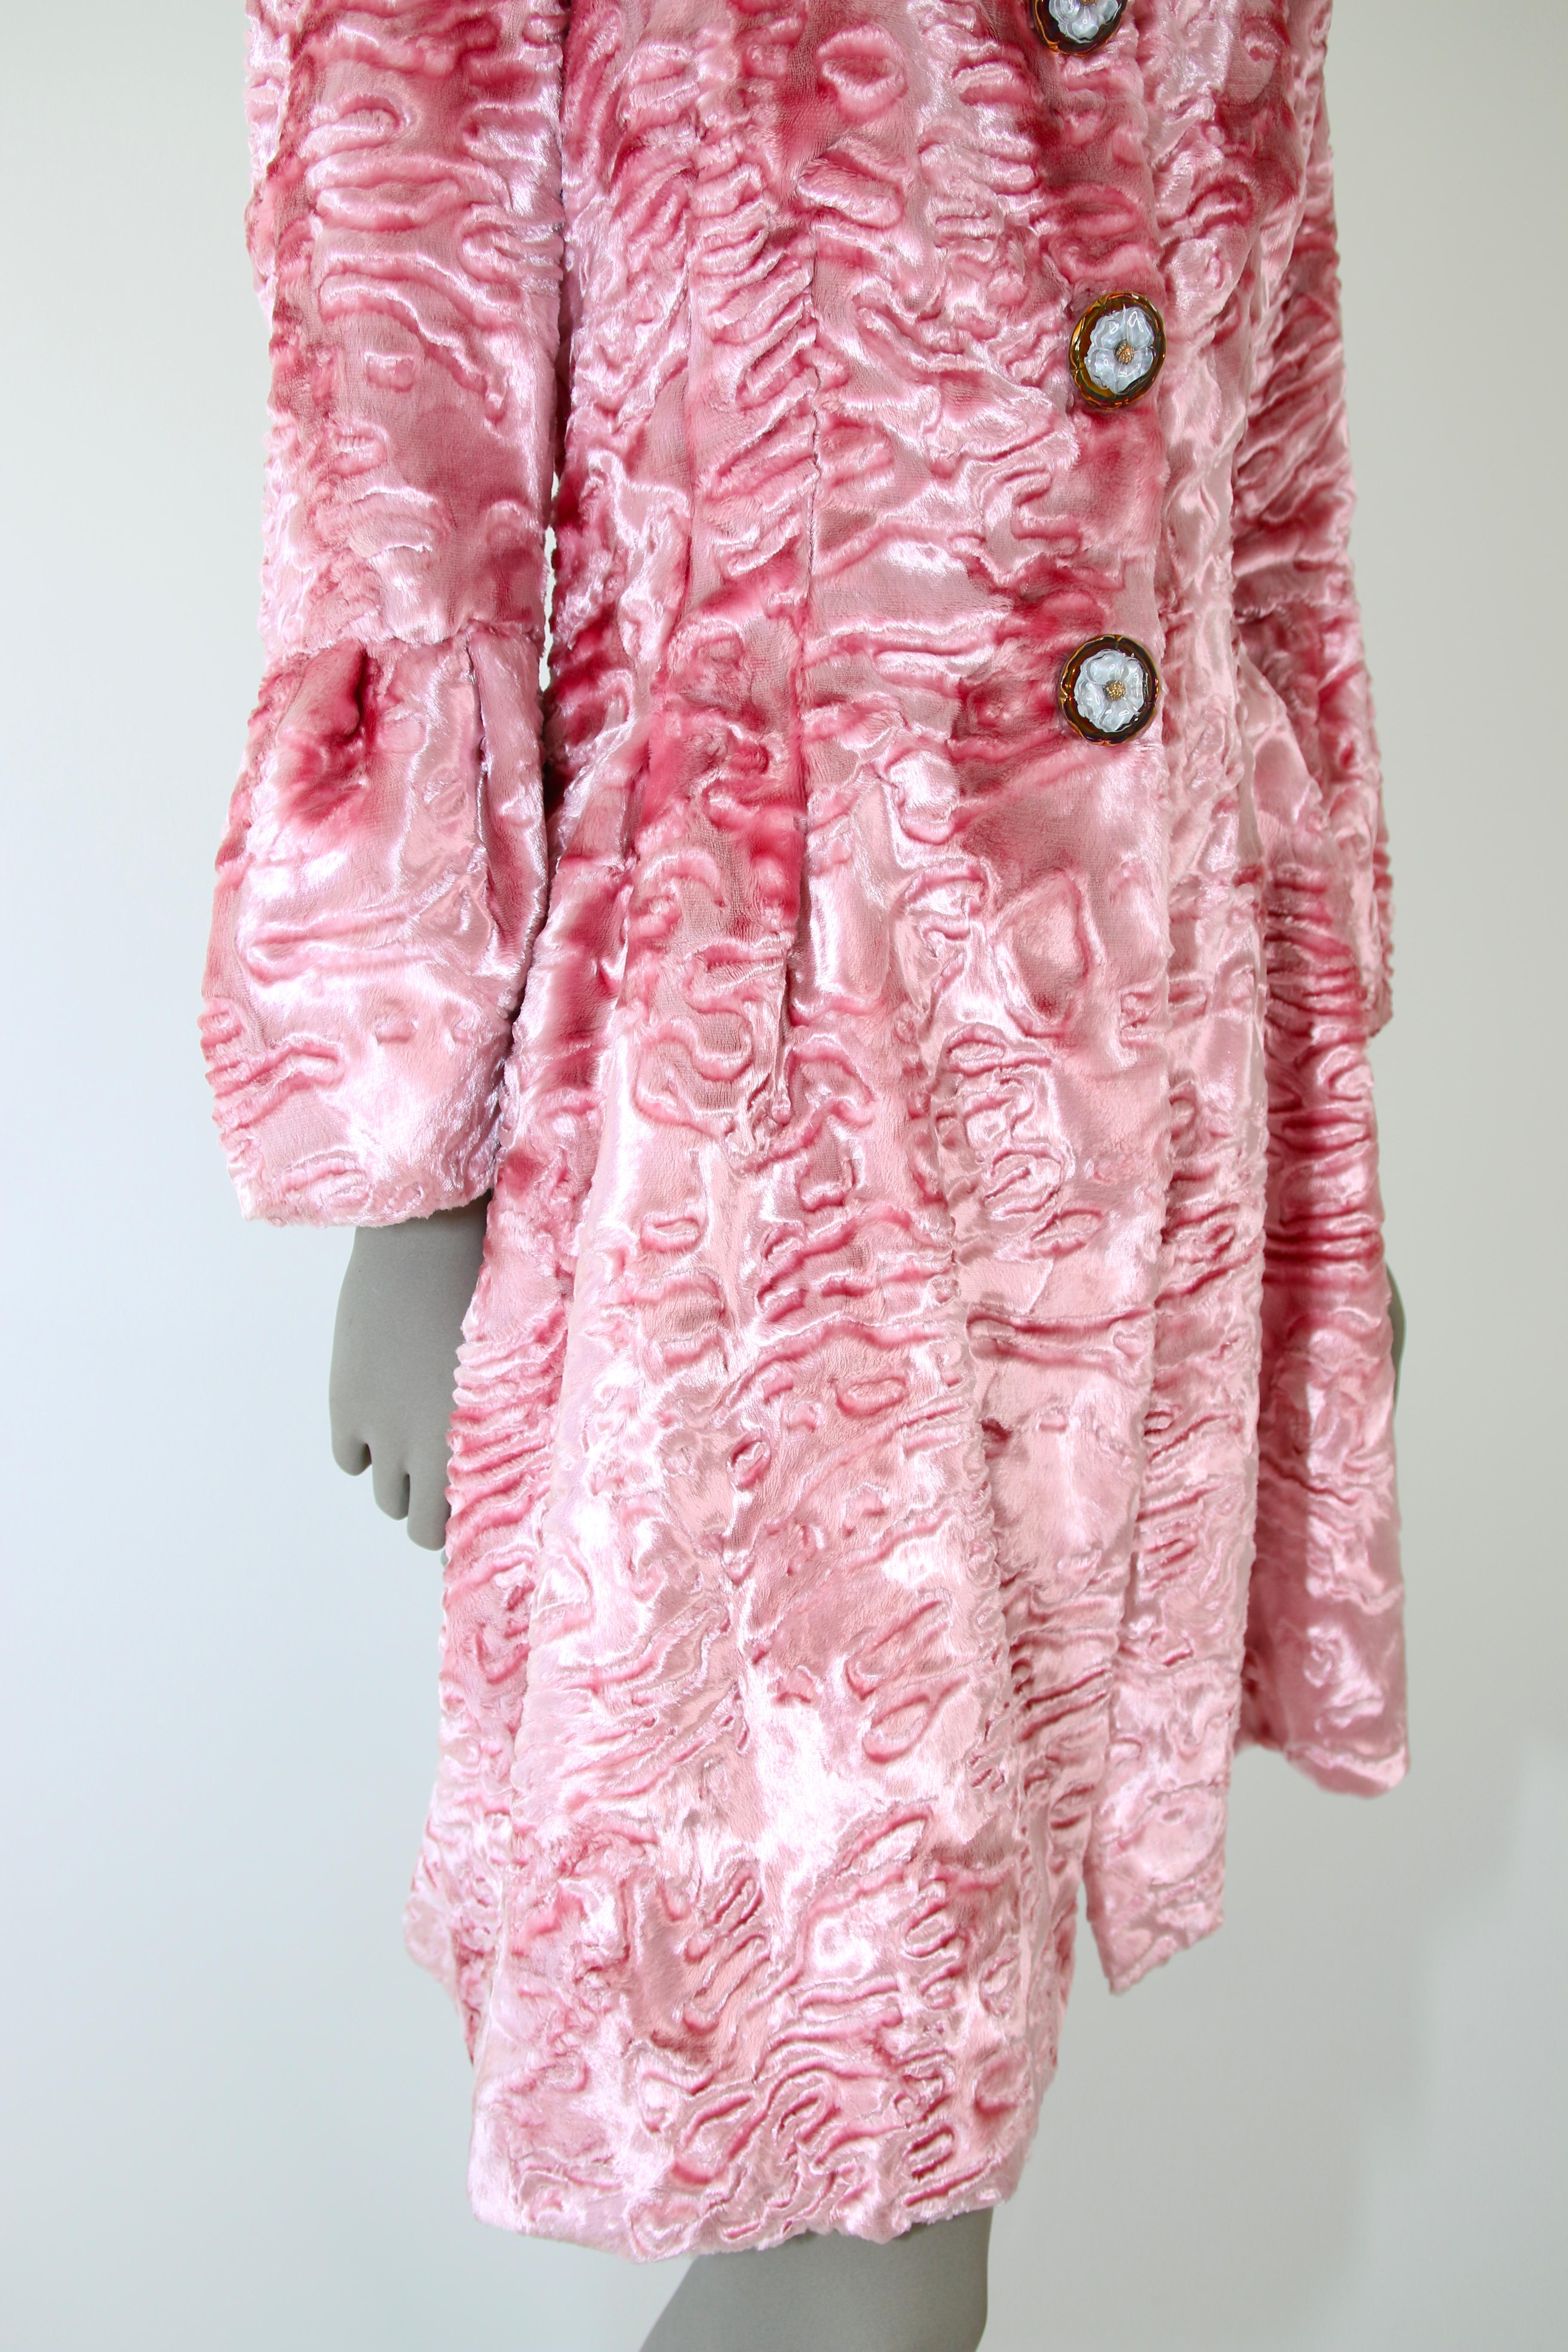 Women's Pelush Pink Faux Fur Coat with Vintage Glass Buttons and Chantilly Lace - XS